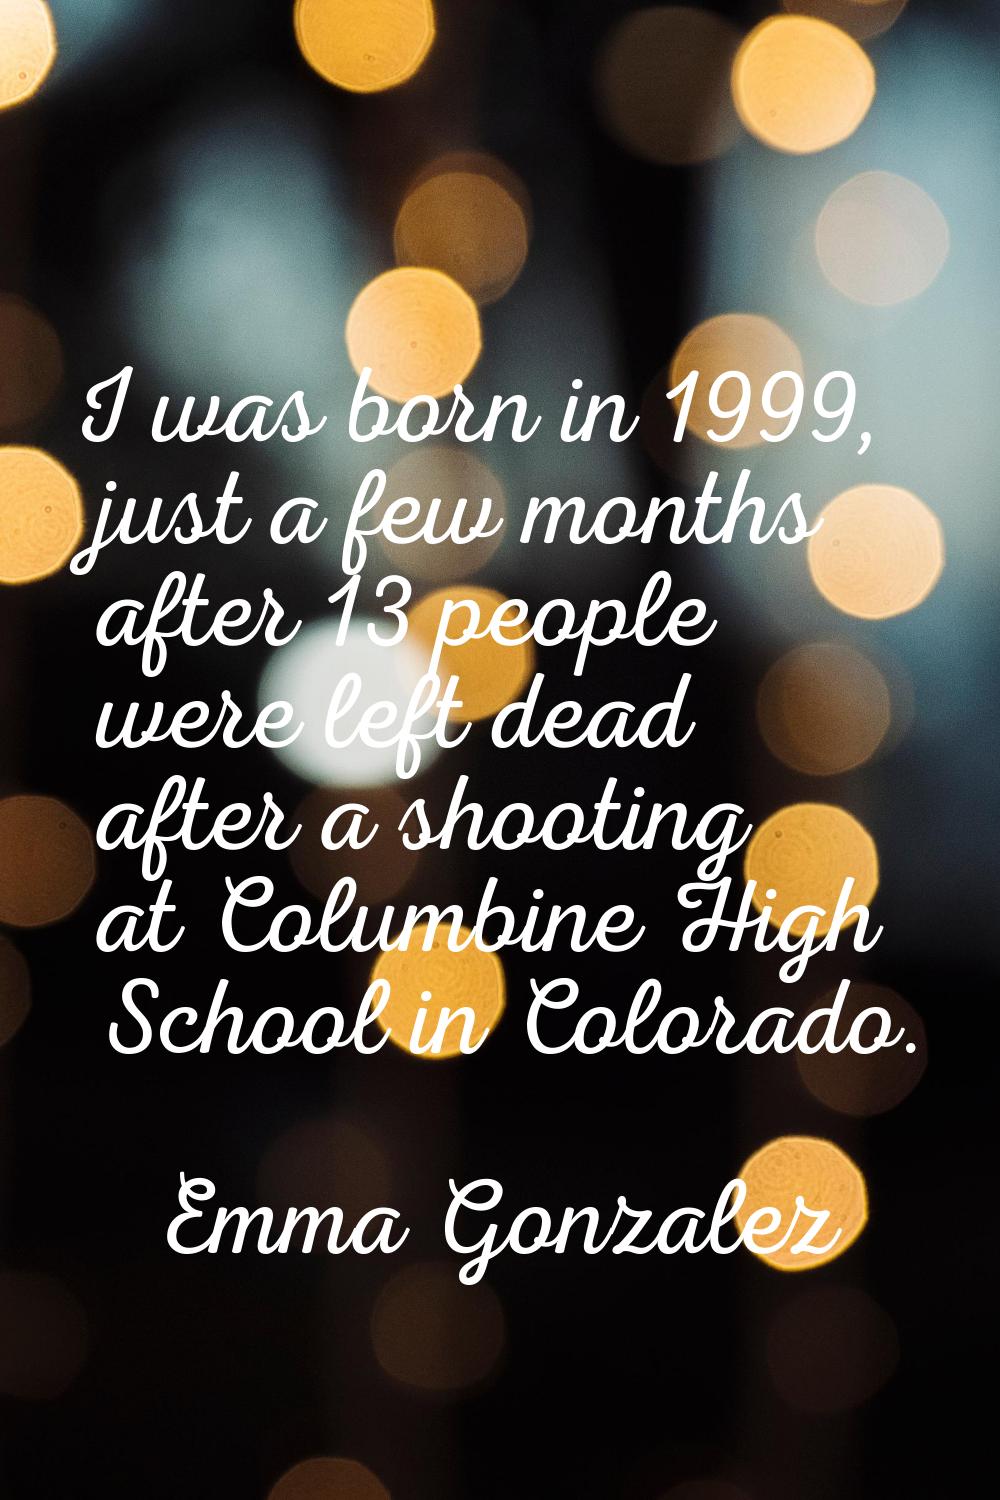 I was born in 1999, just a few months after 13 people were left dead after a shooting at Columbine 